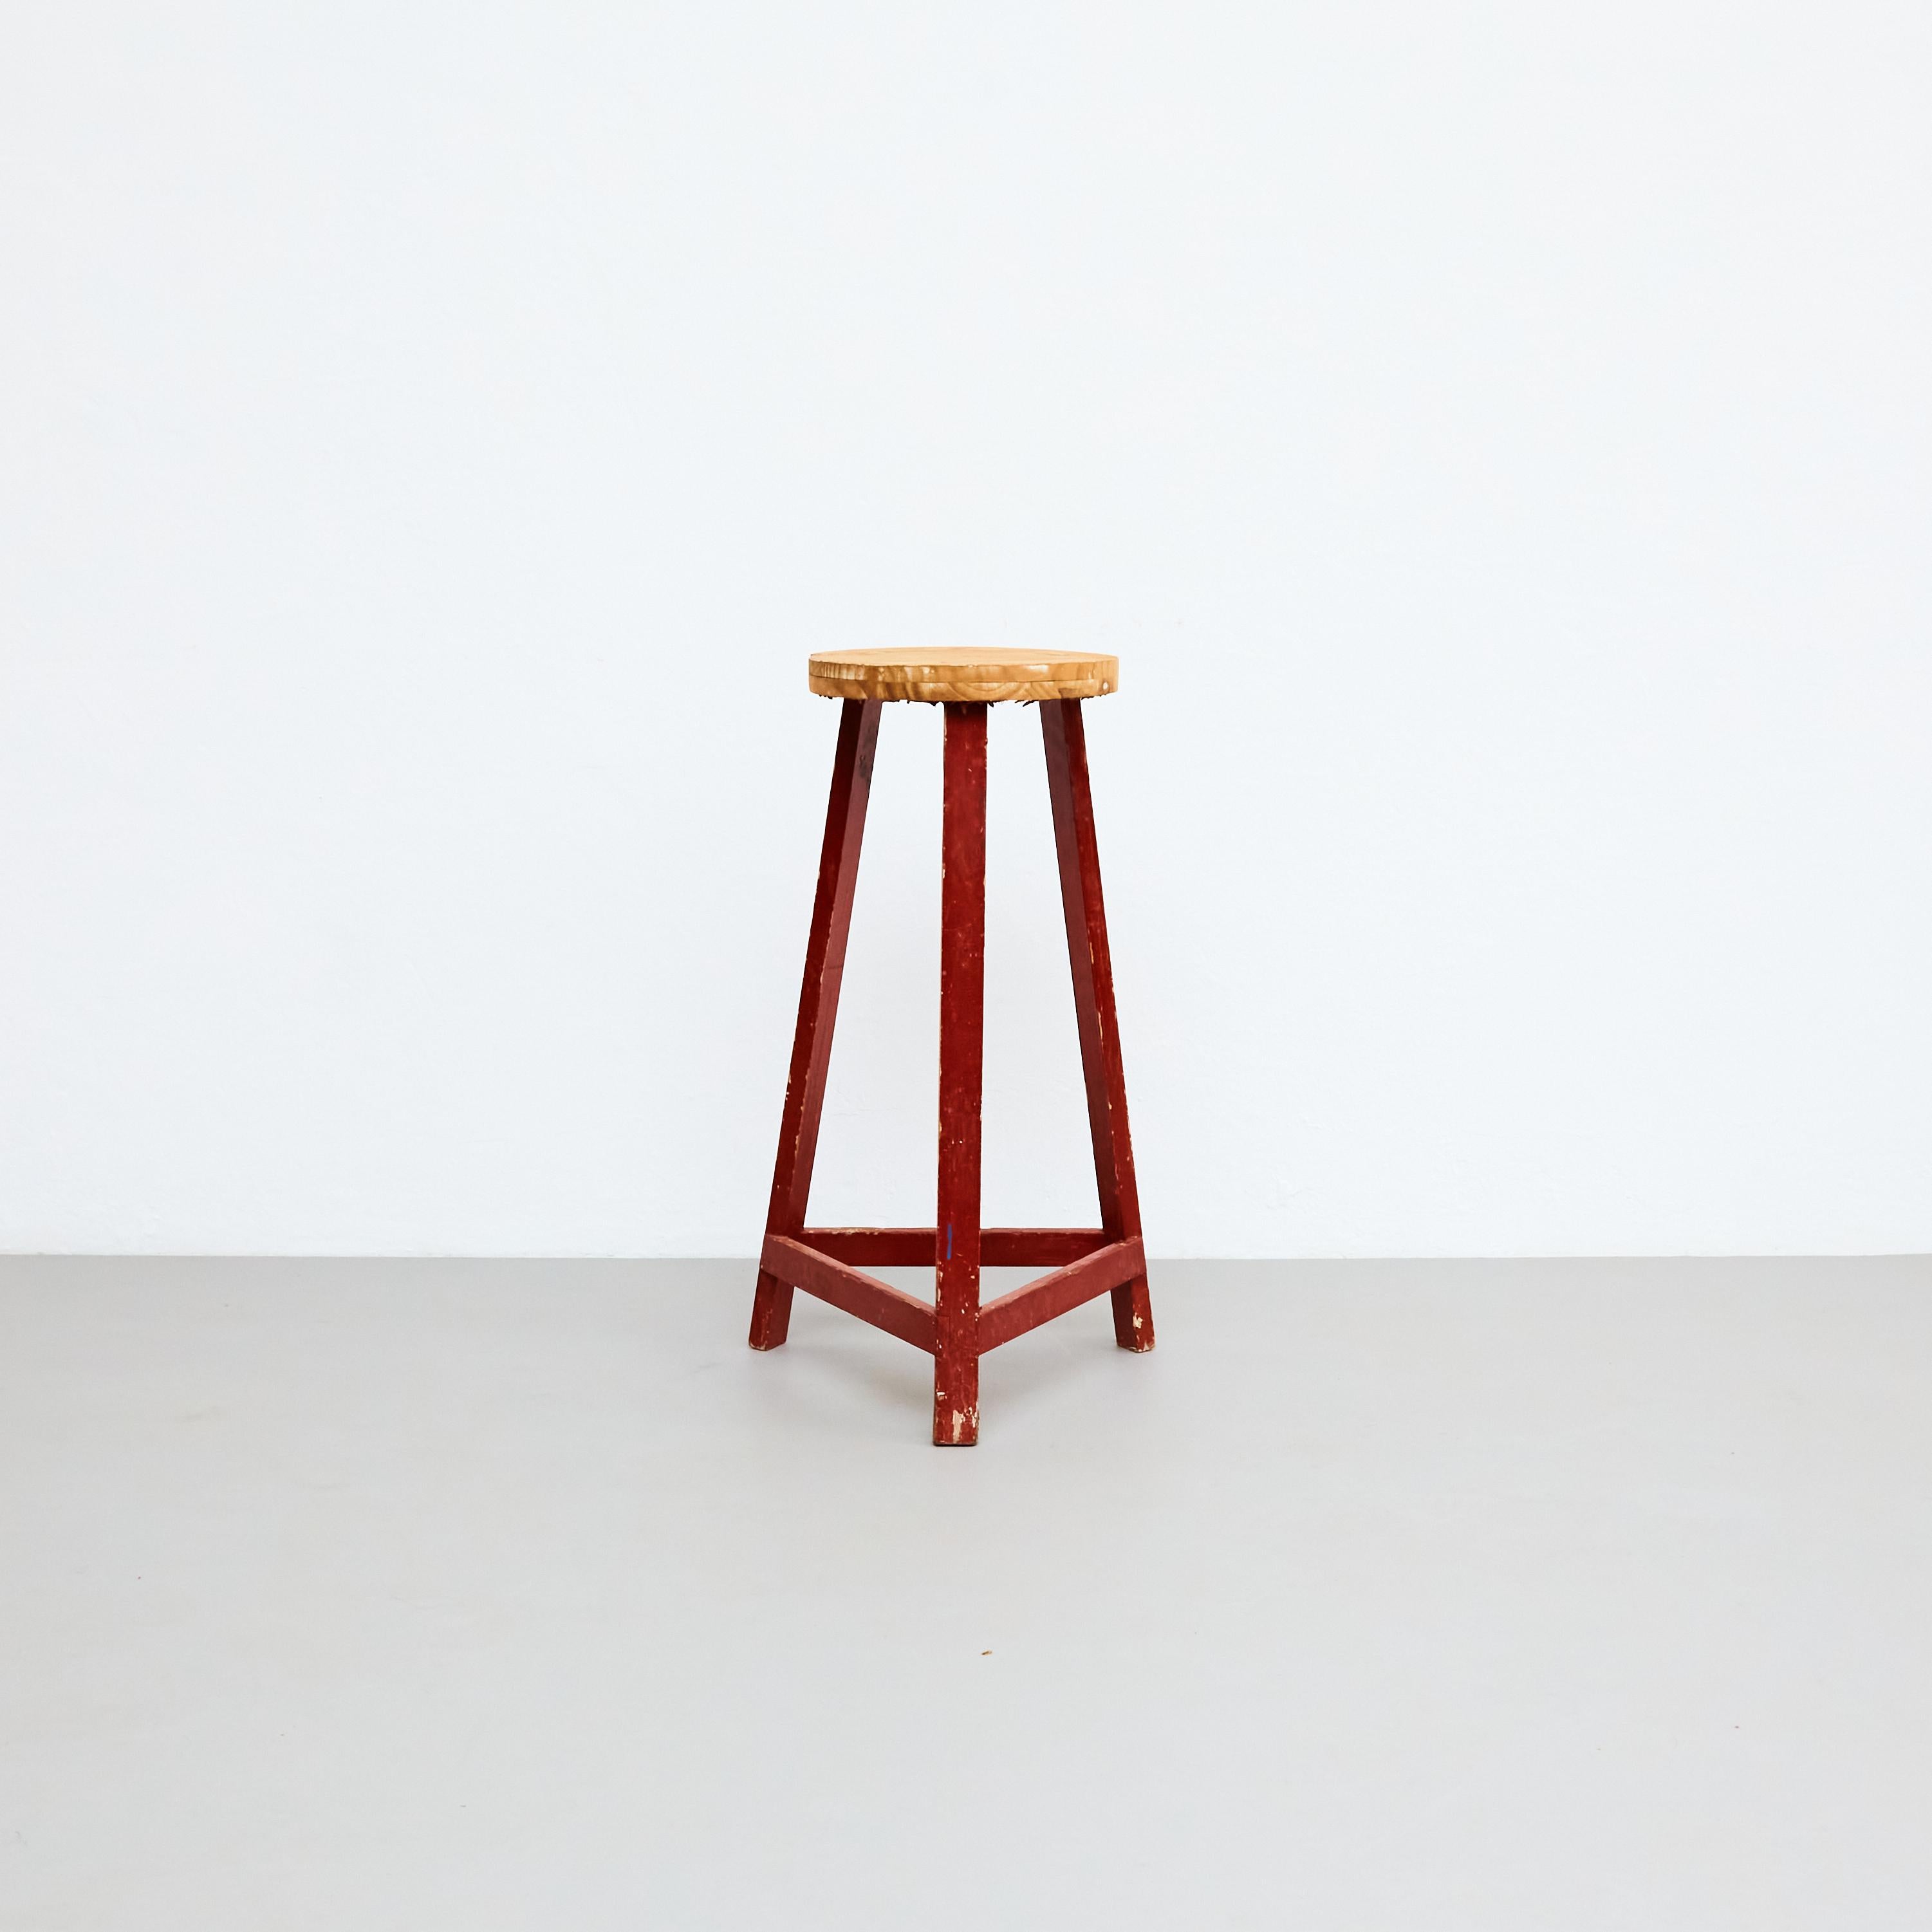 French Mid-Century Modern Rationalist Wood High Stool, circa 1950 For Sale